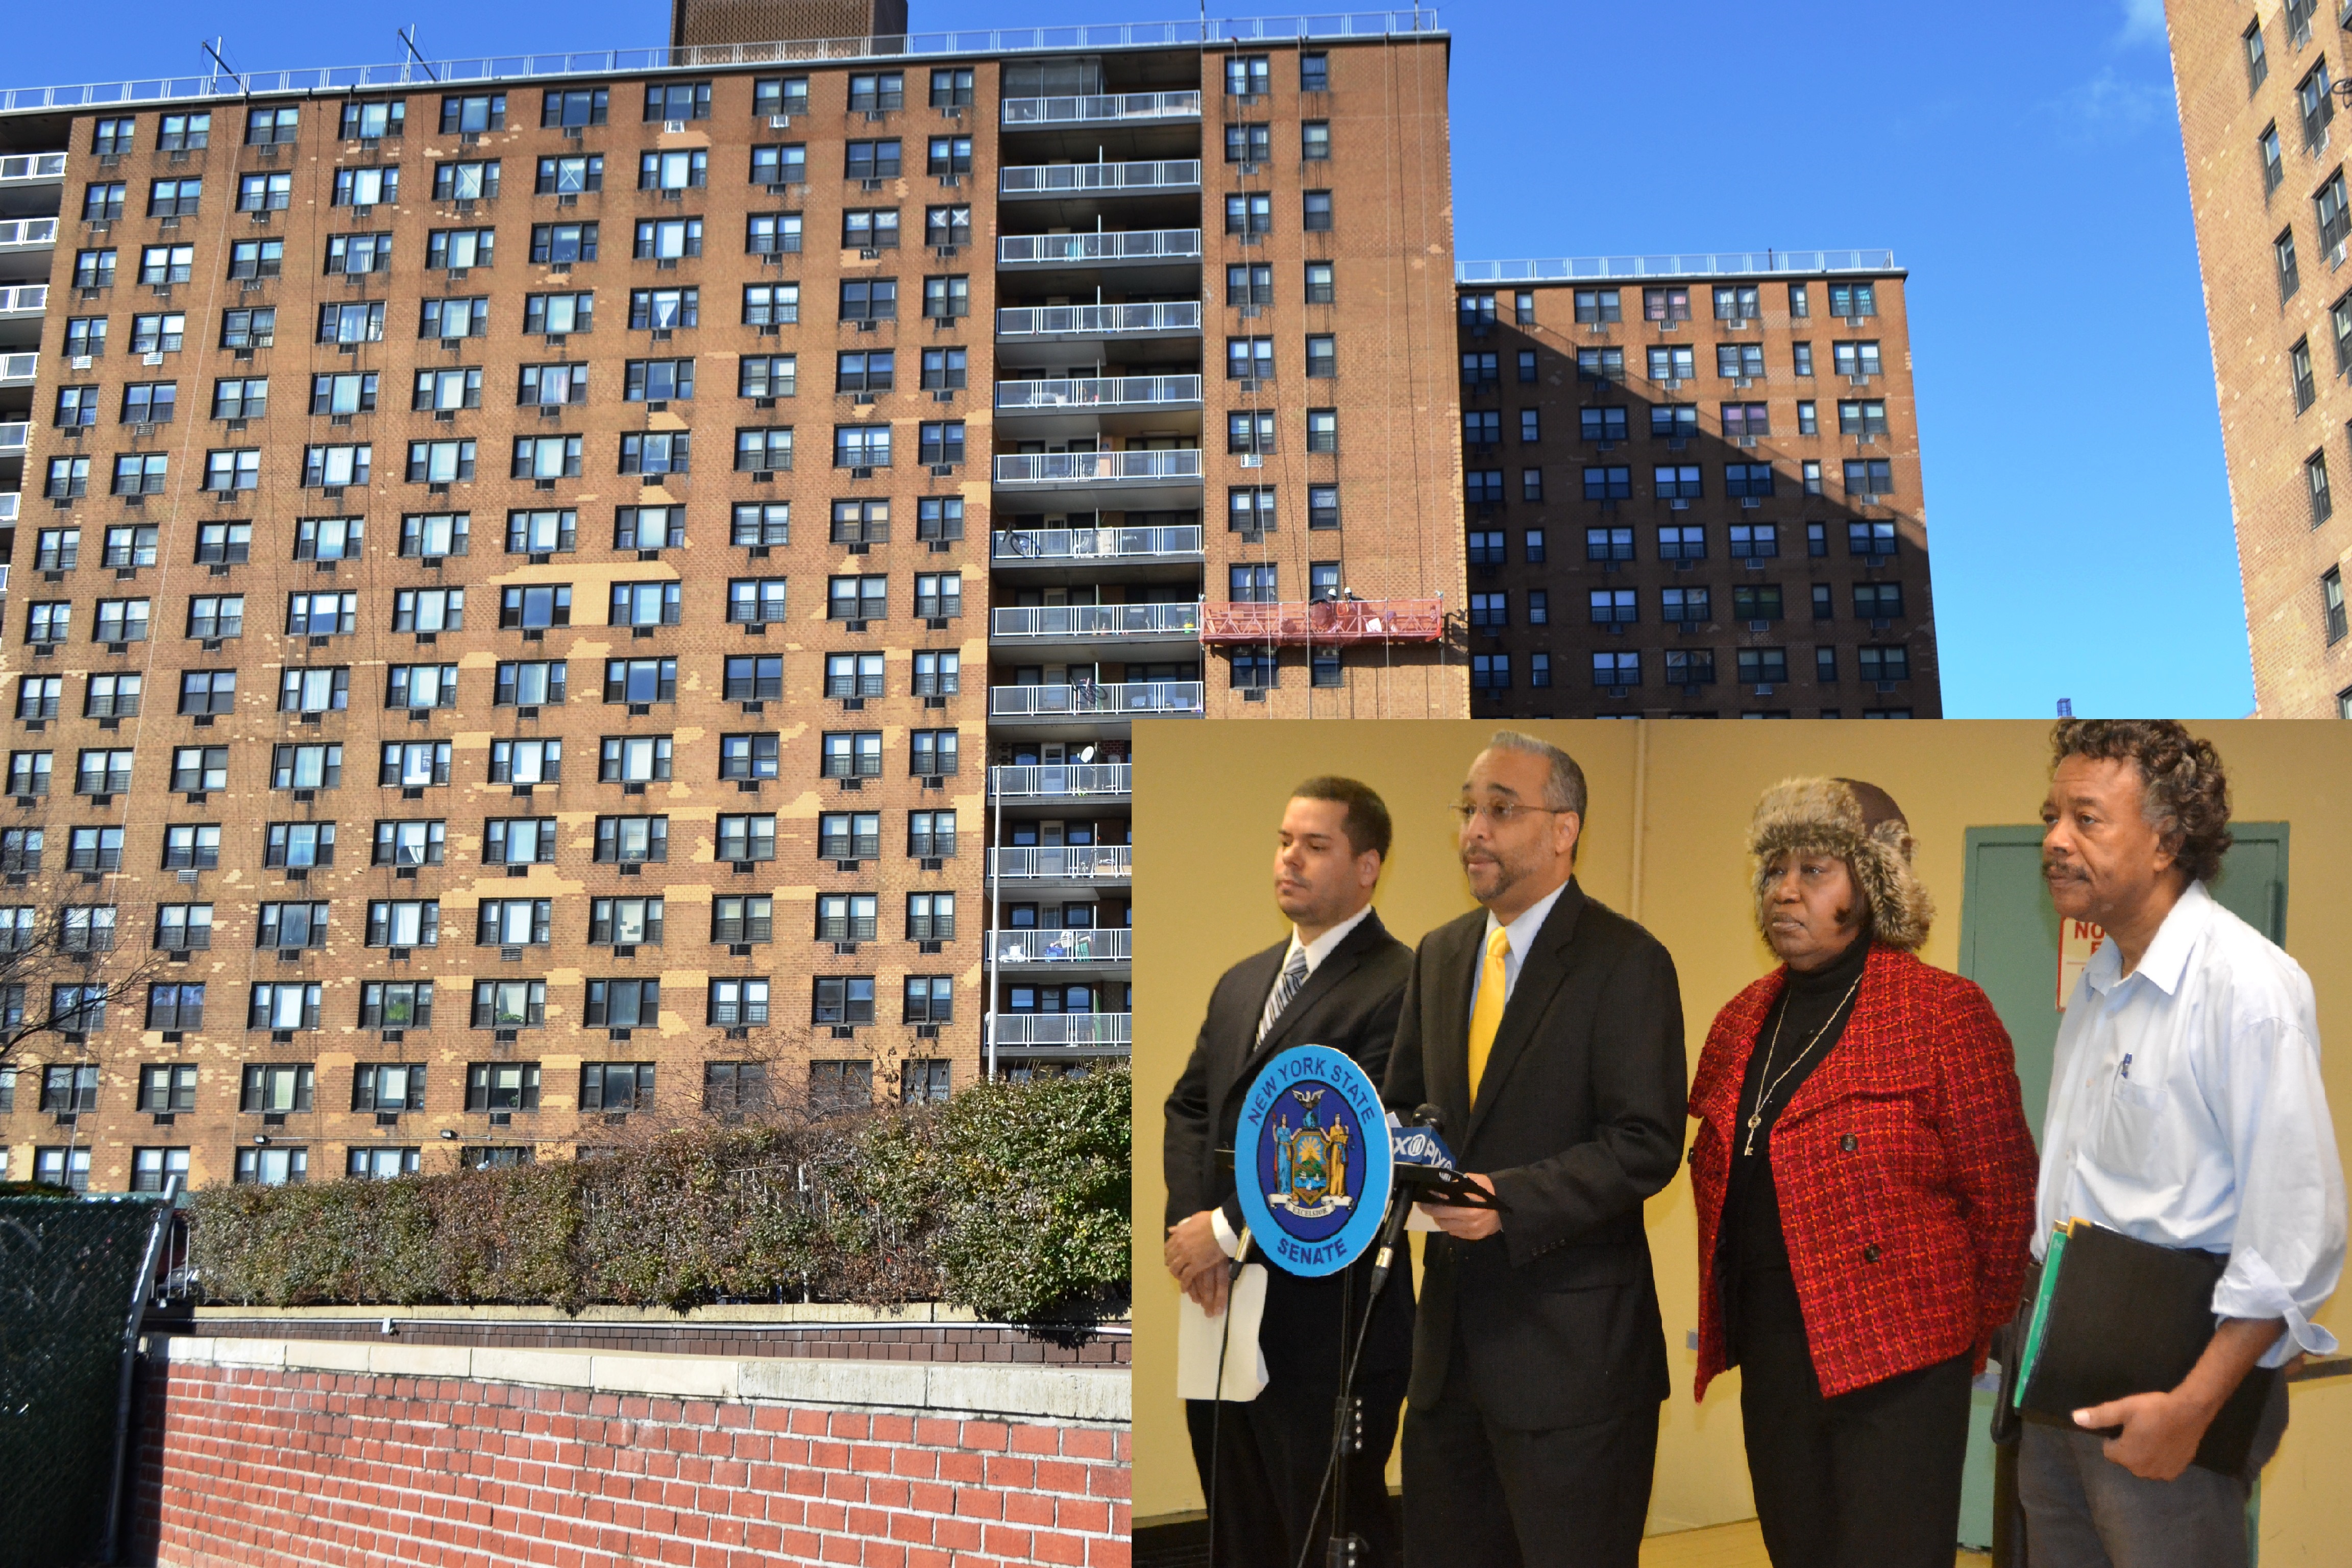 State Senator Jose Peralta announced on Thursday the launch of a LeFrak City fire safety education campaign.